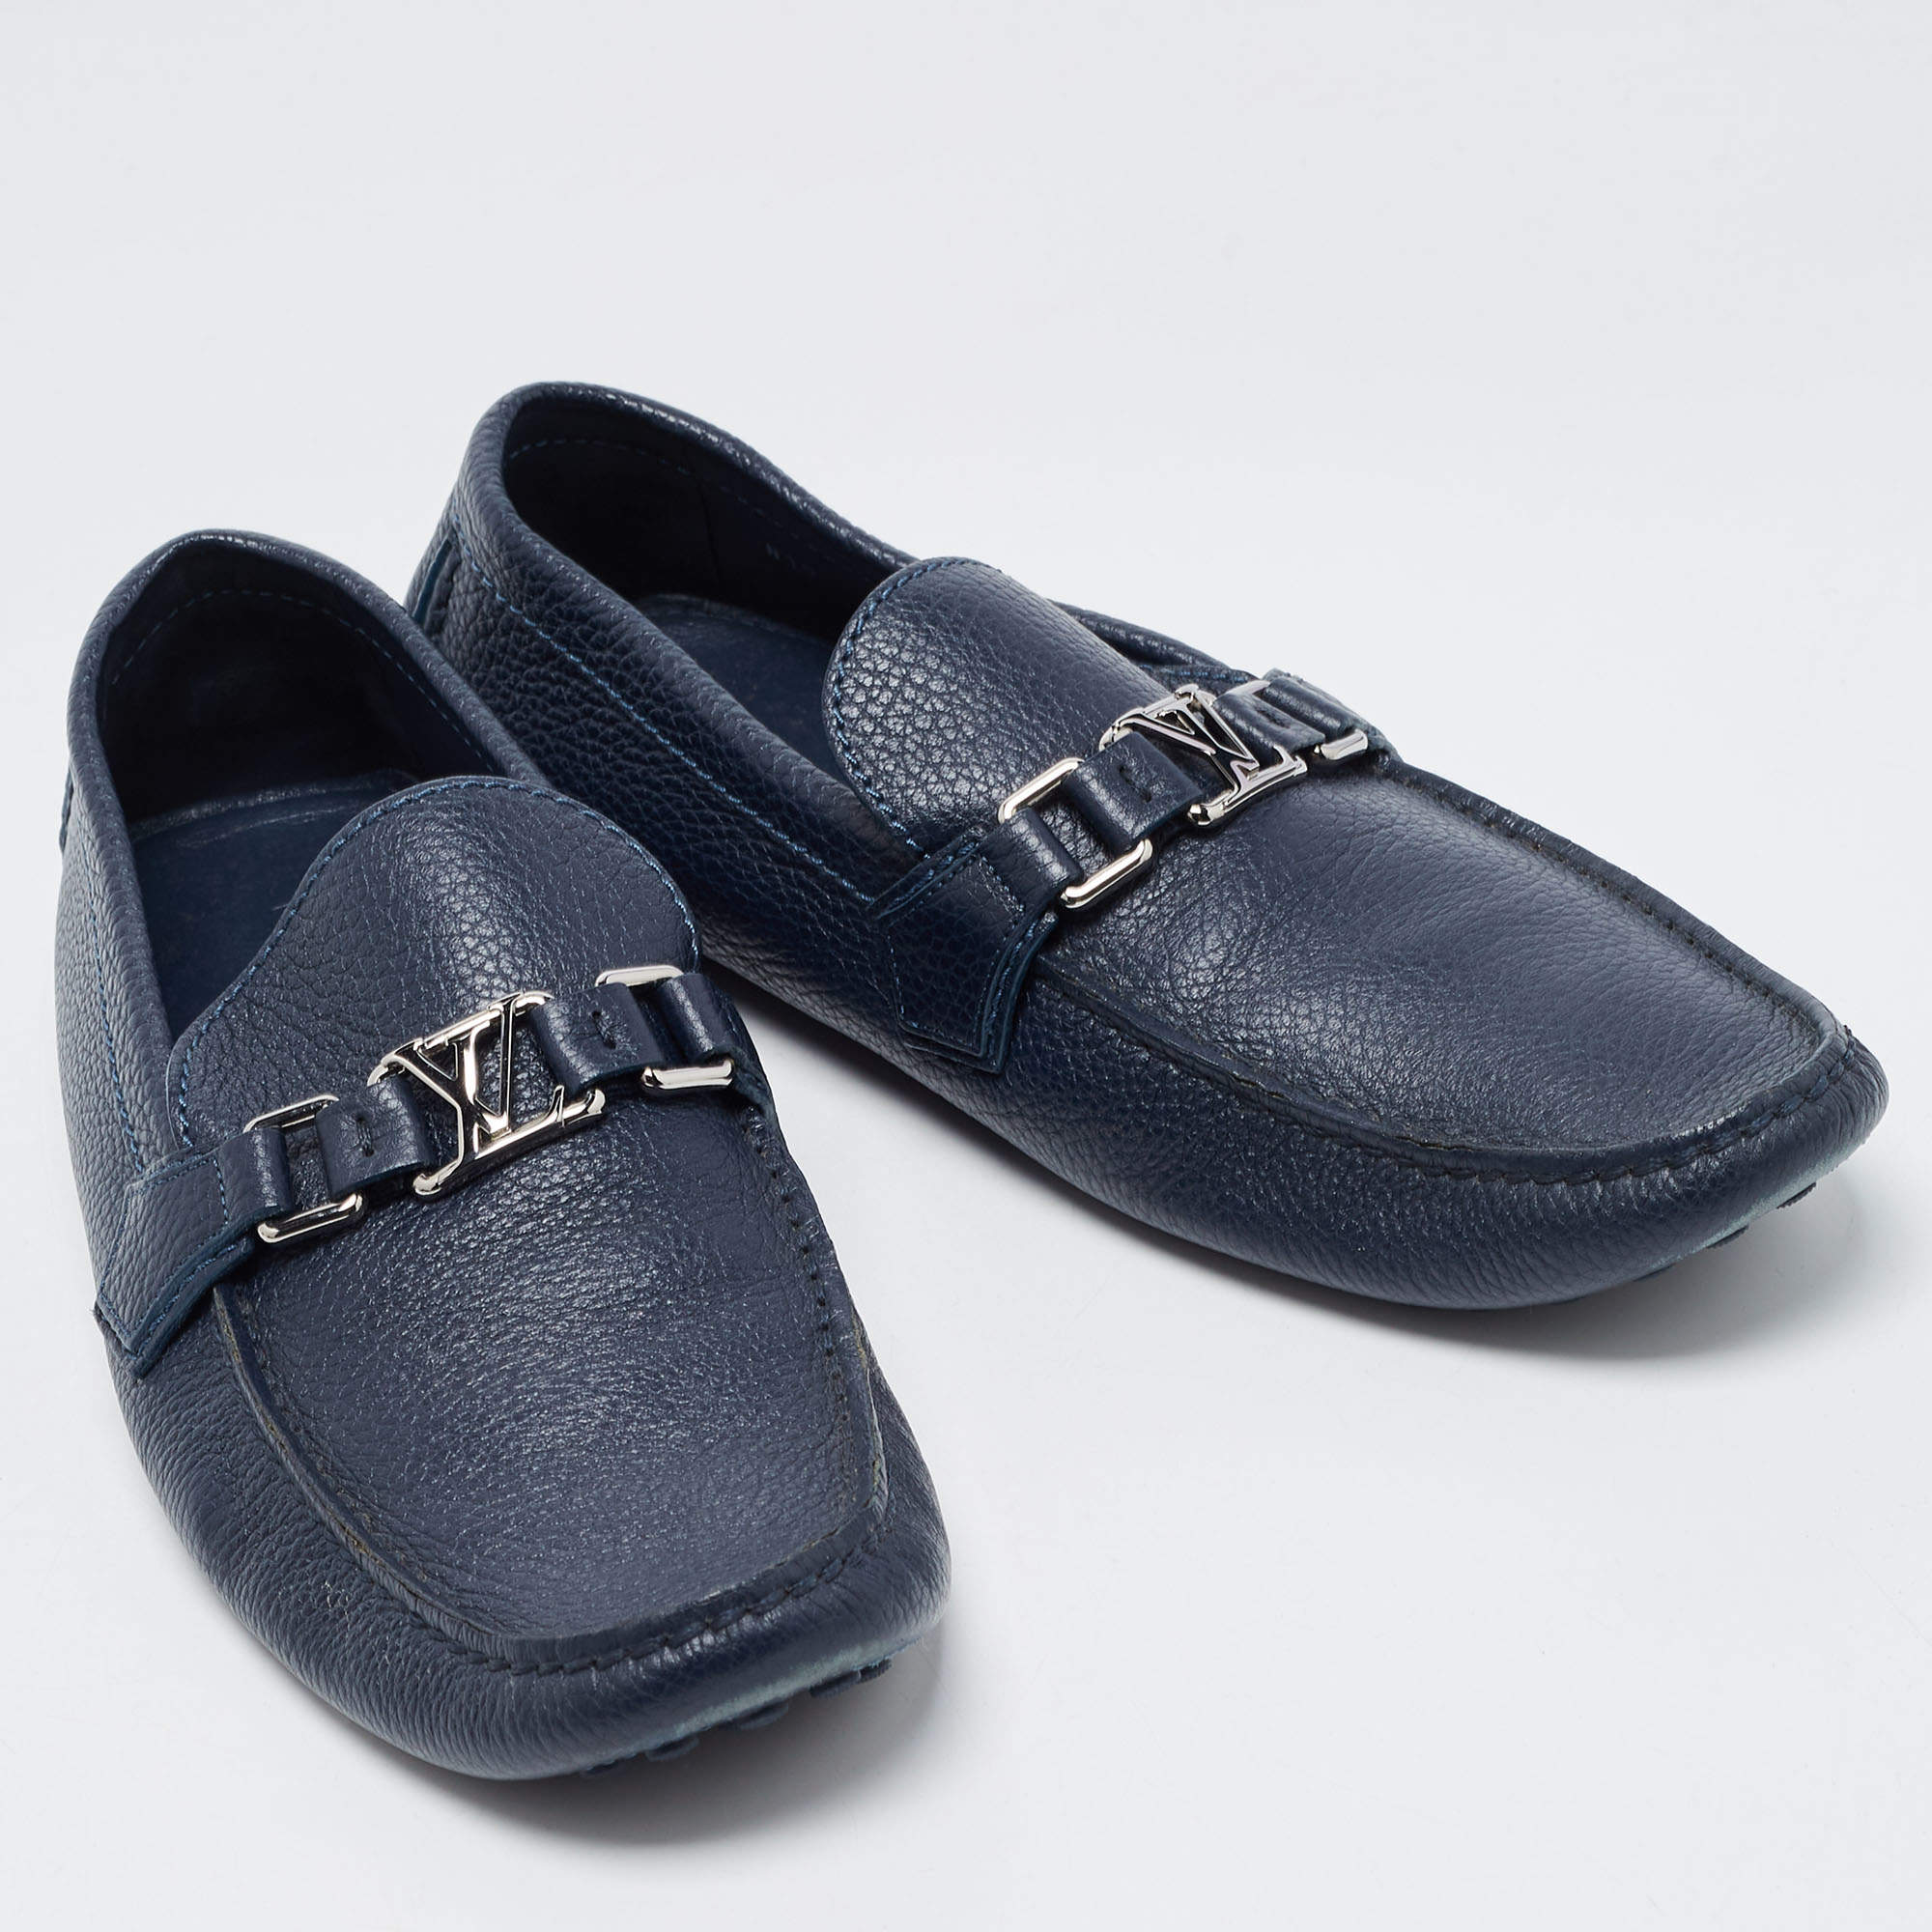 Louis Vuitton Navy Blue Canvas and Leather Hockenheim Loafers Size 44